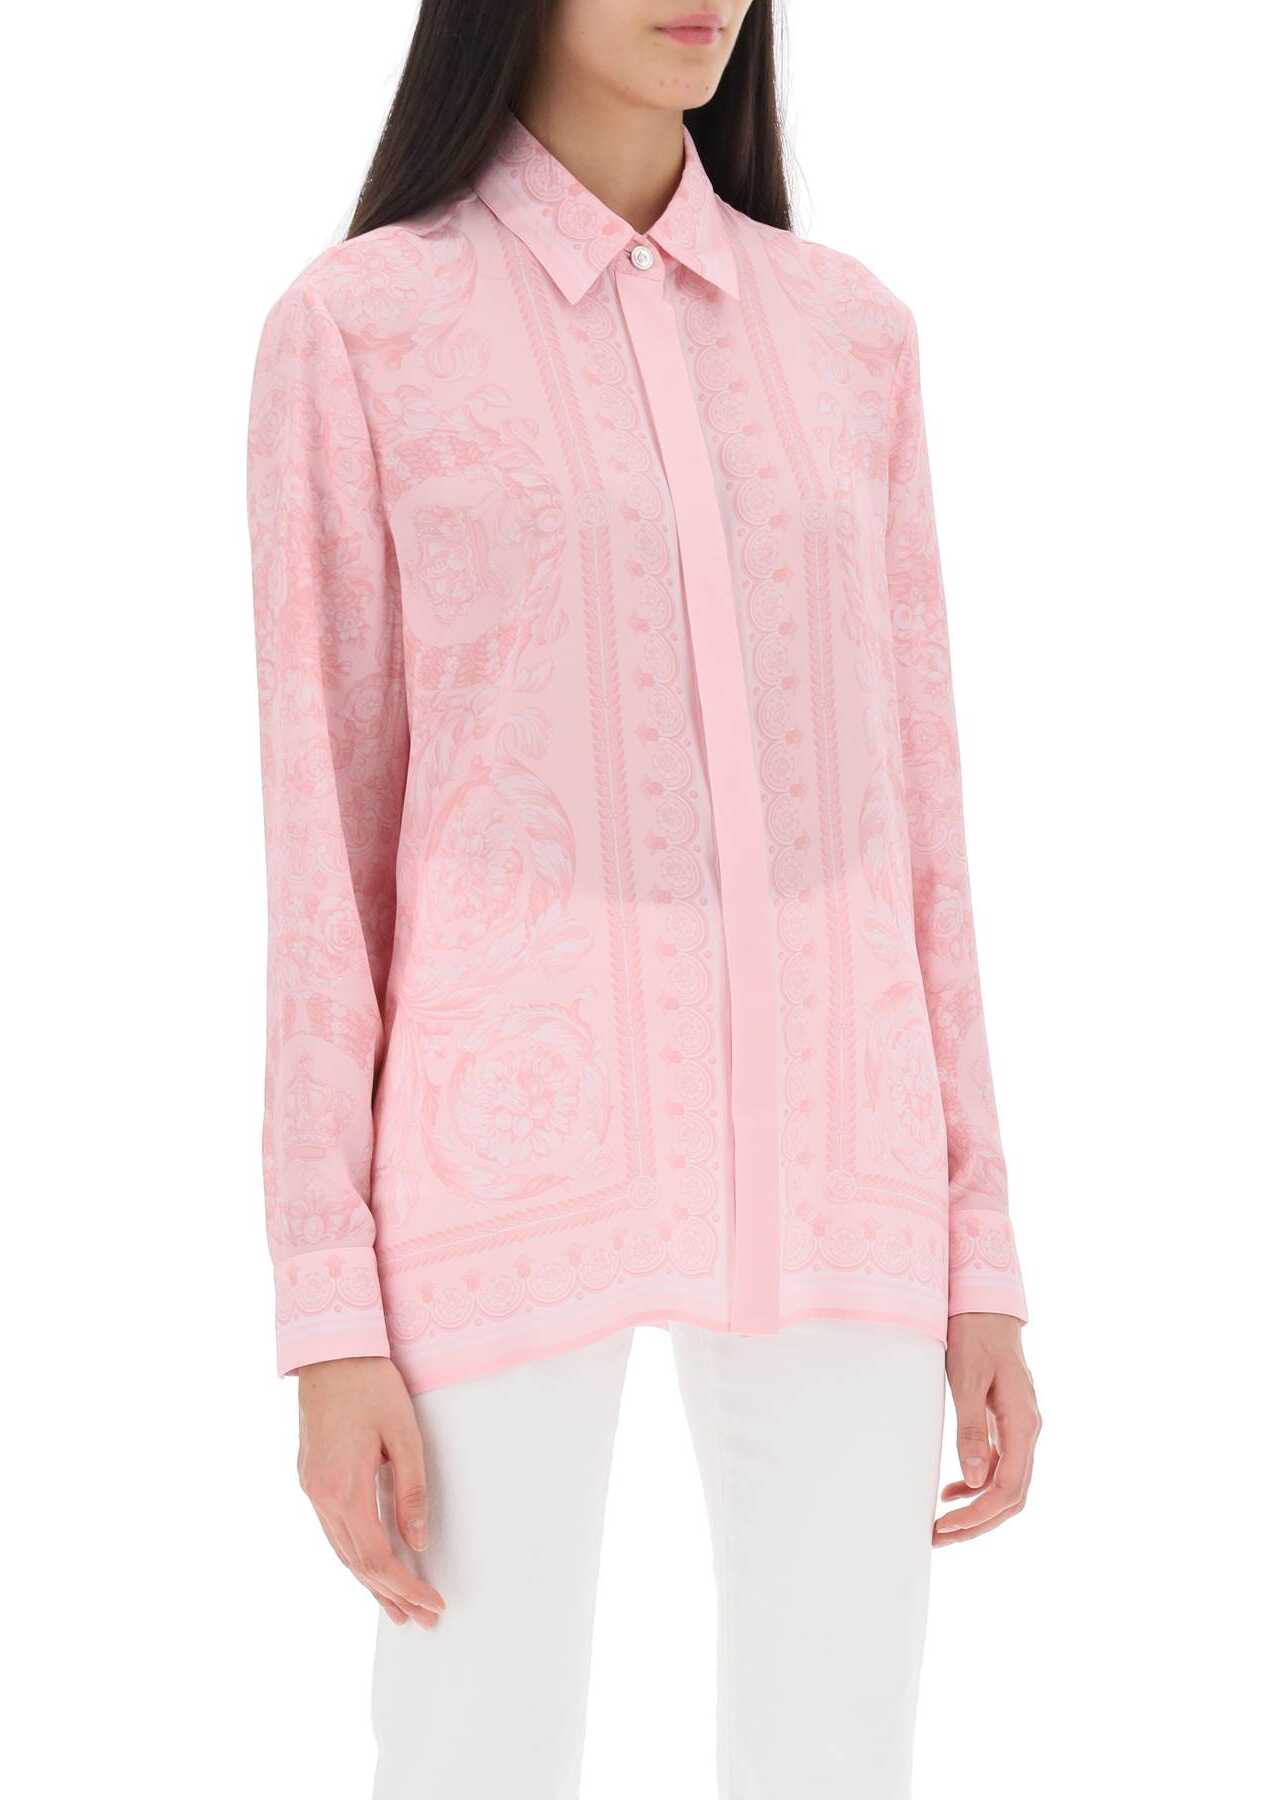 Versace Barocco Shirt In Crepe De Chine PALE PINK